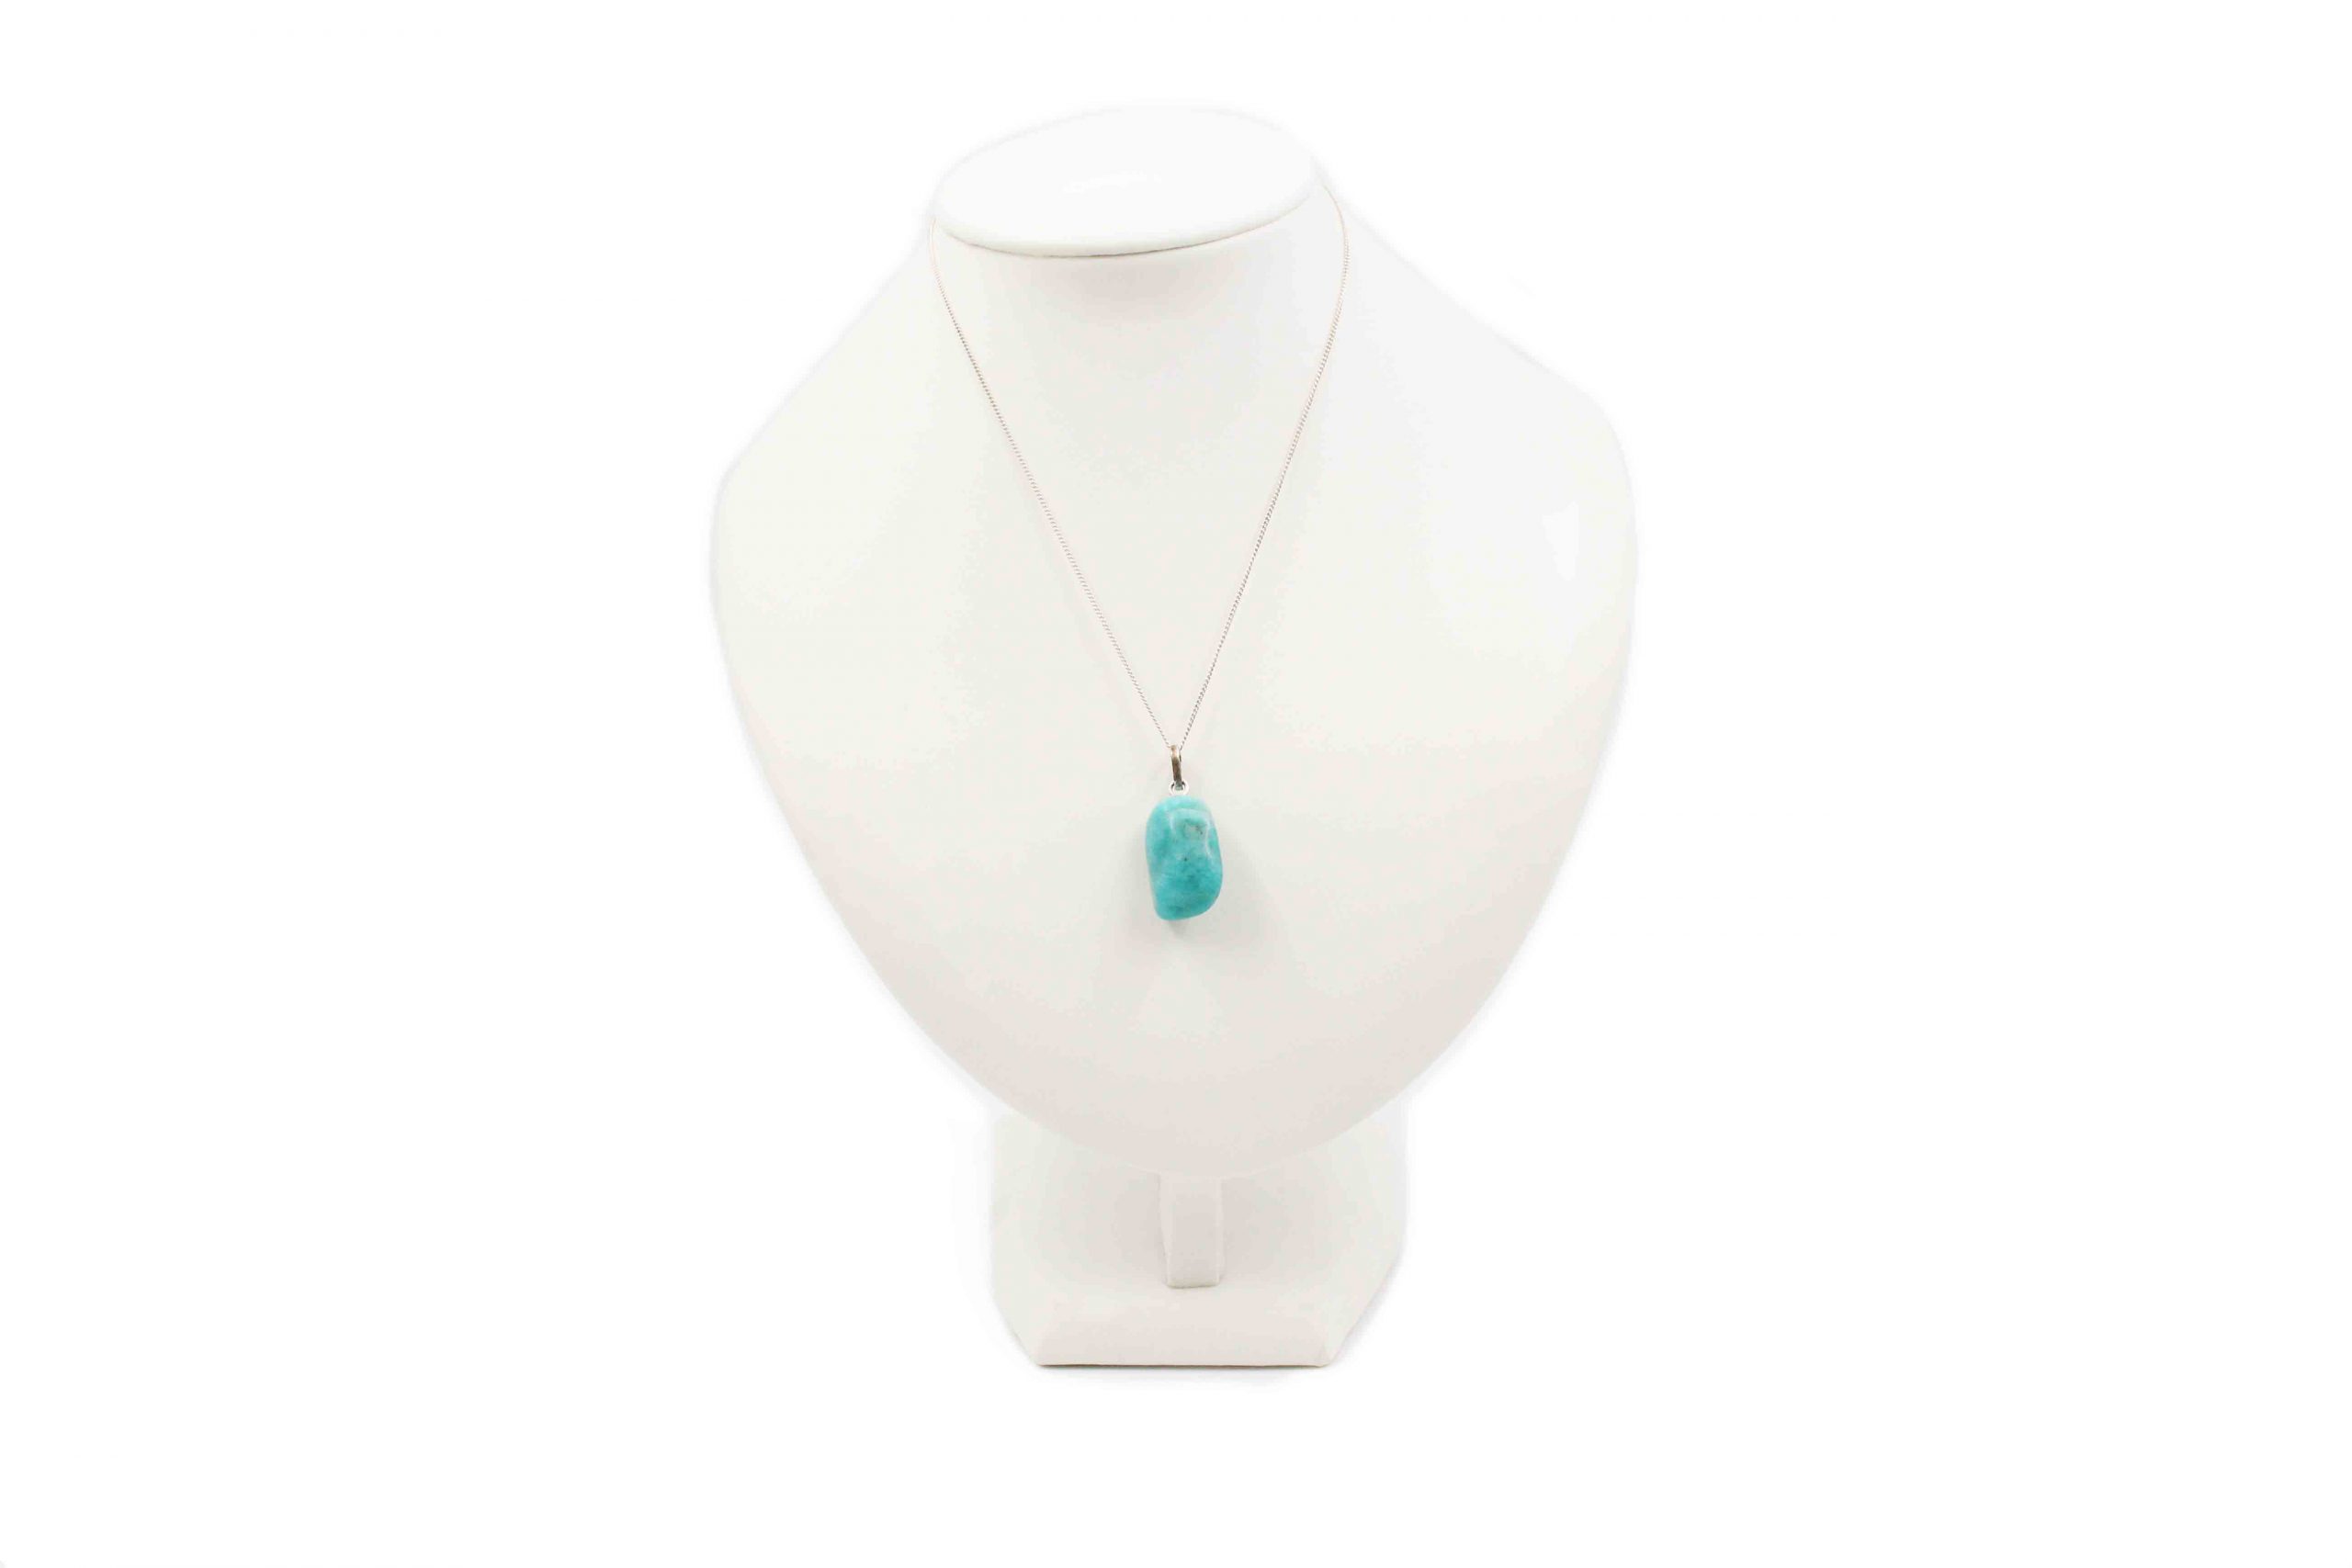 Amazonite Tumbled Sterling Silver Pendant - Crystal Dreams